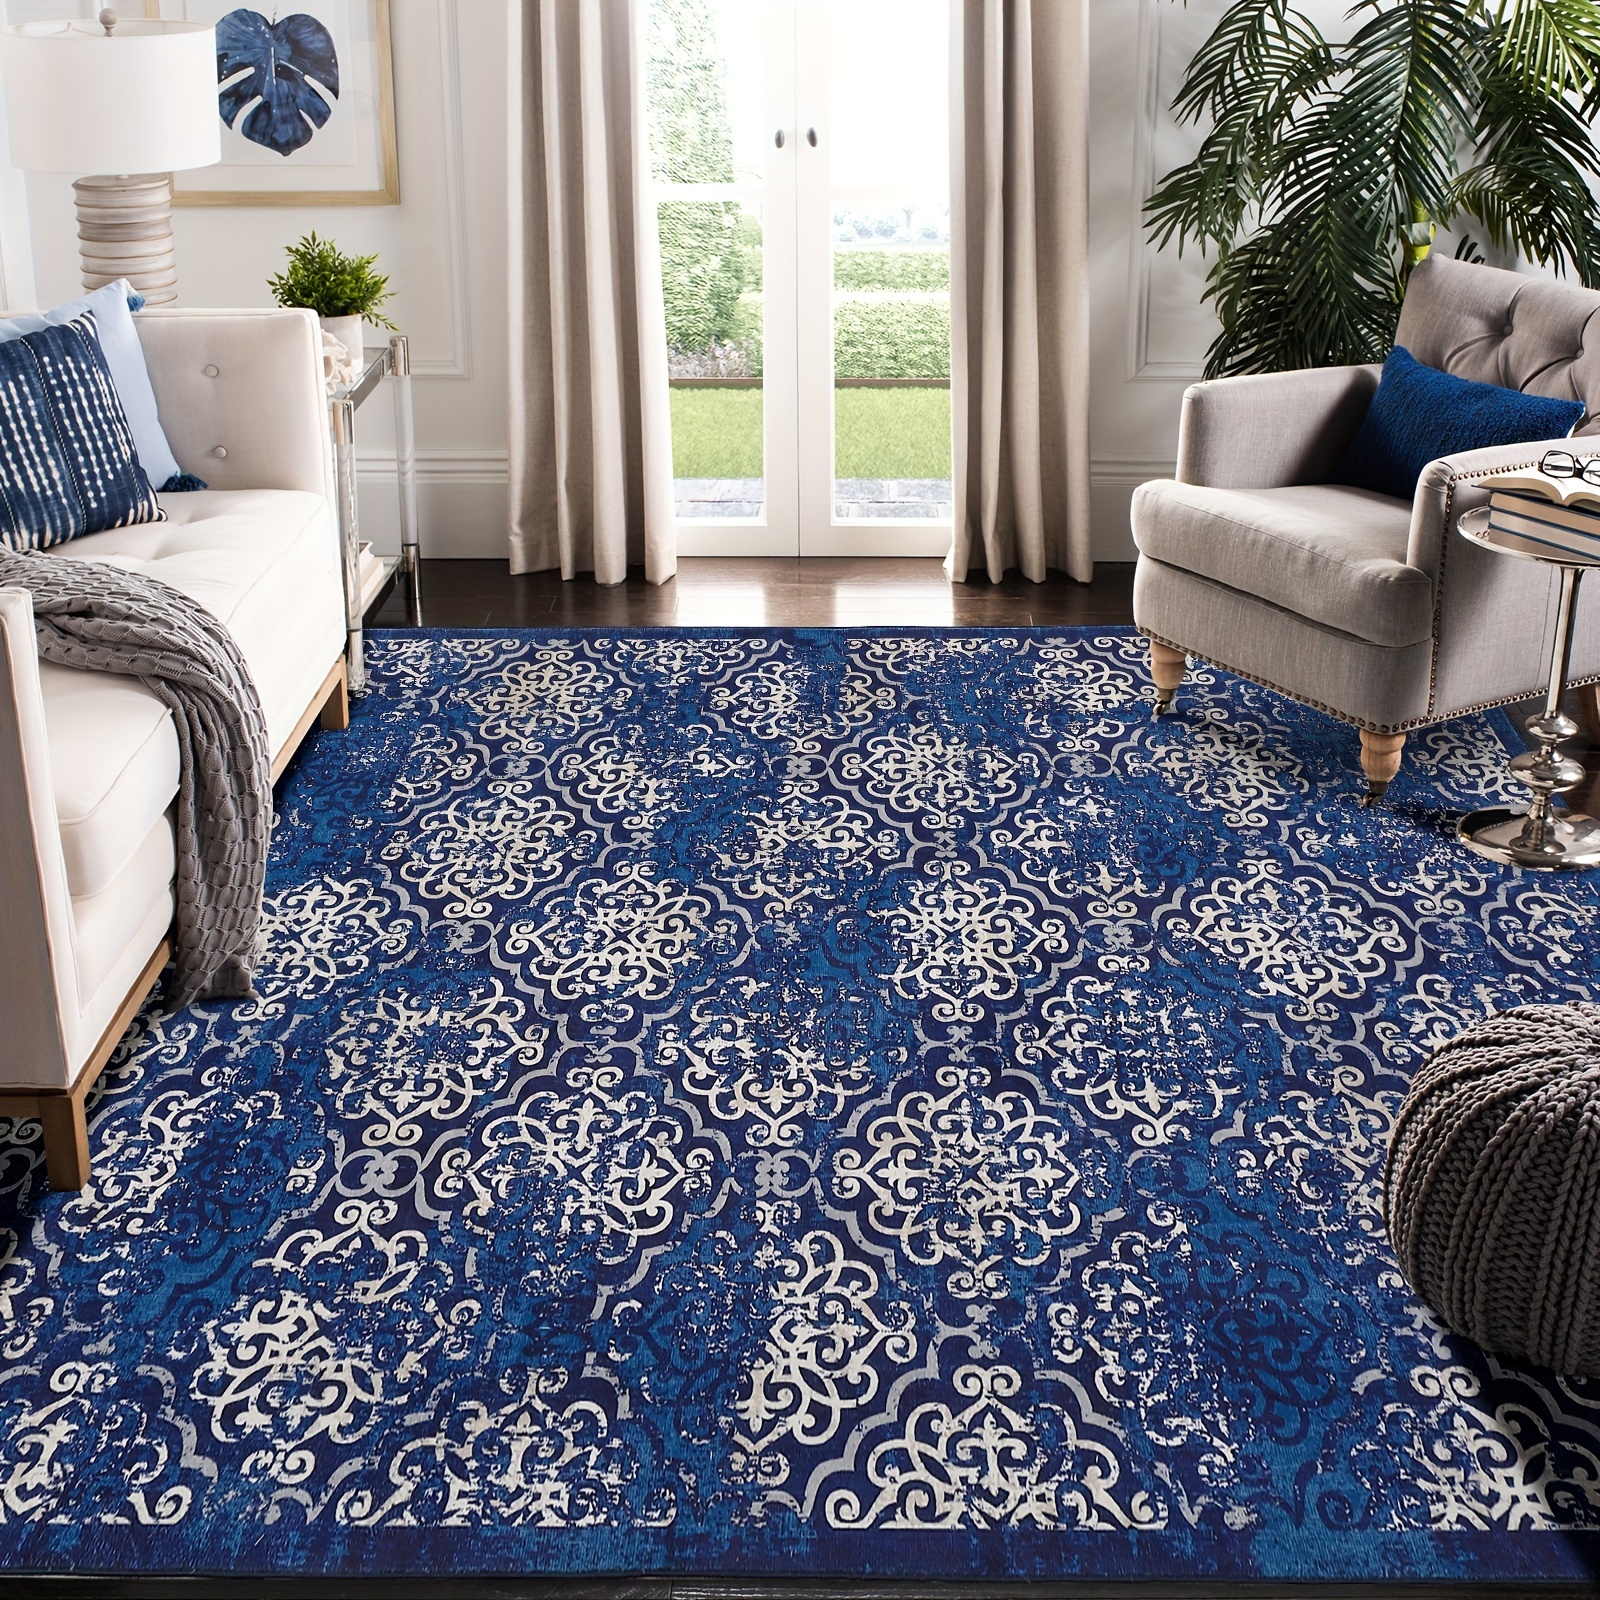 

1 Pc Washable Retro Vintage Patterned Carpets Low Pile Non-shedding Indoor Throw Rugs Anti-slip Backing Easy To Clean Soft Large Carpet For Bedroom Living Room Playroom Reception Room, Blue